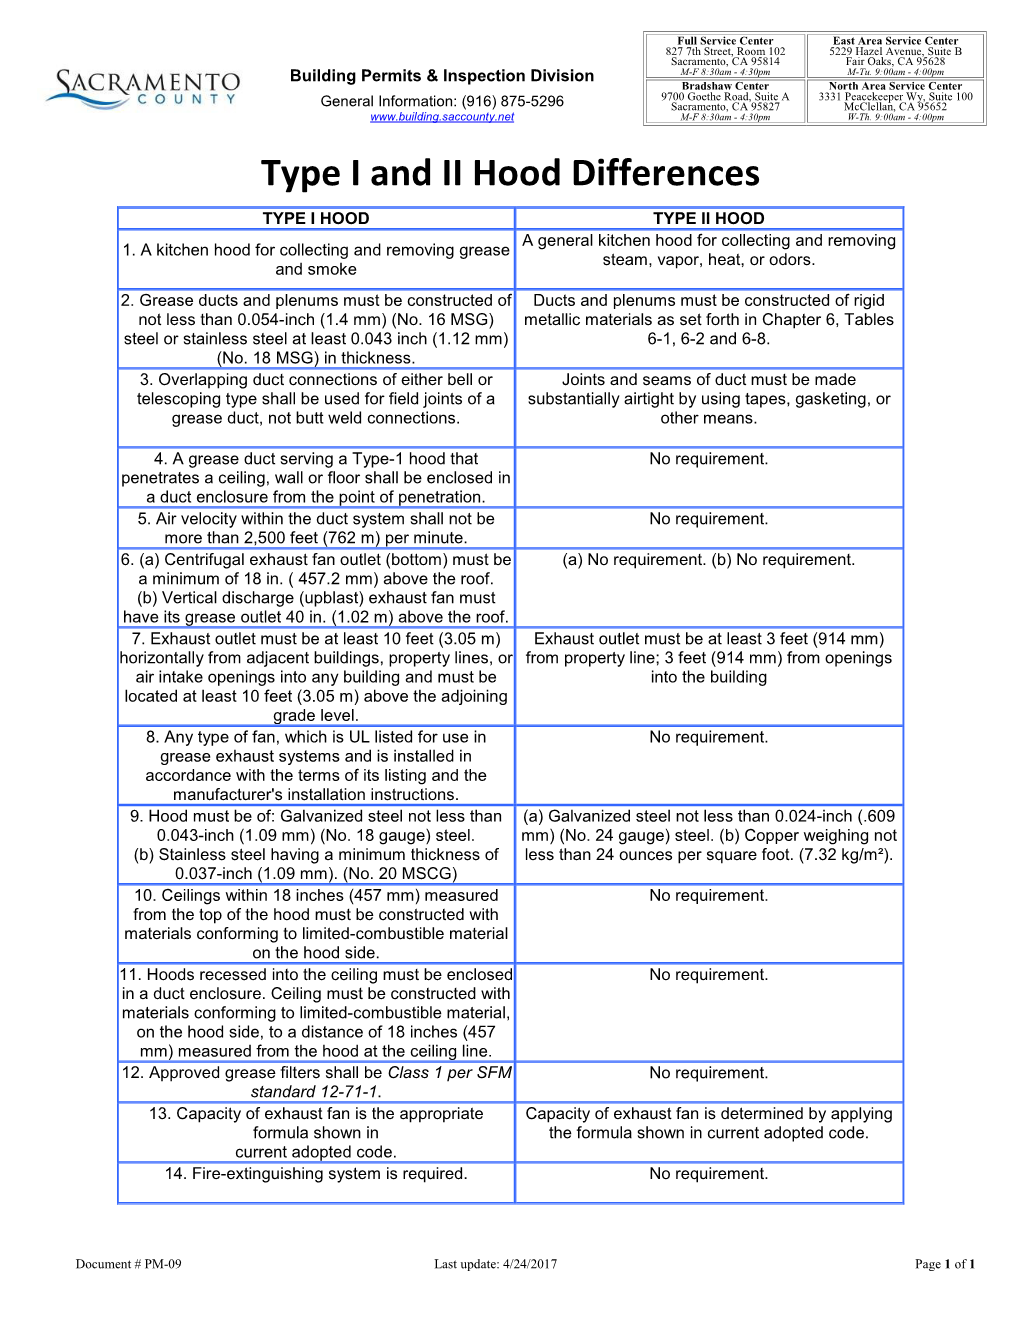 Type I and II Hood Differences TYPE I HOOD TYPE II HOOD a General Kitchen Hood for Collecting and Removing 1